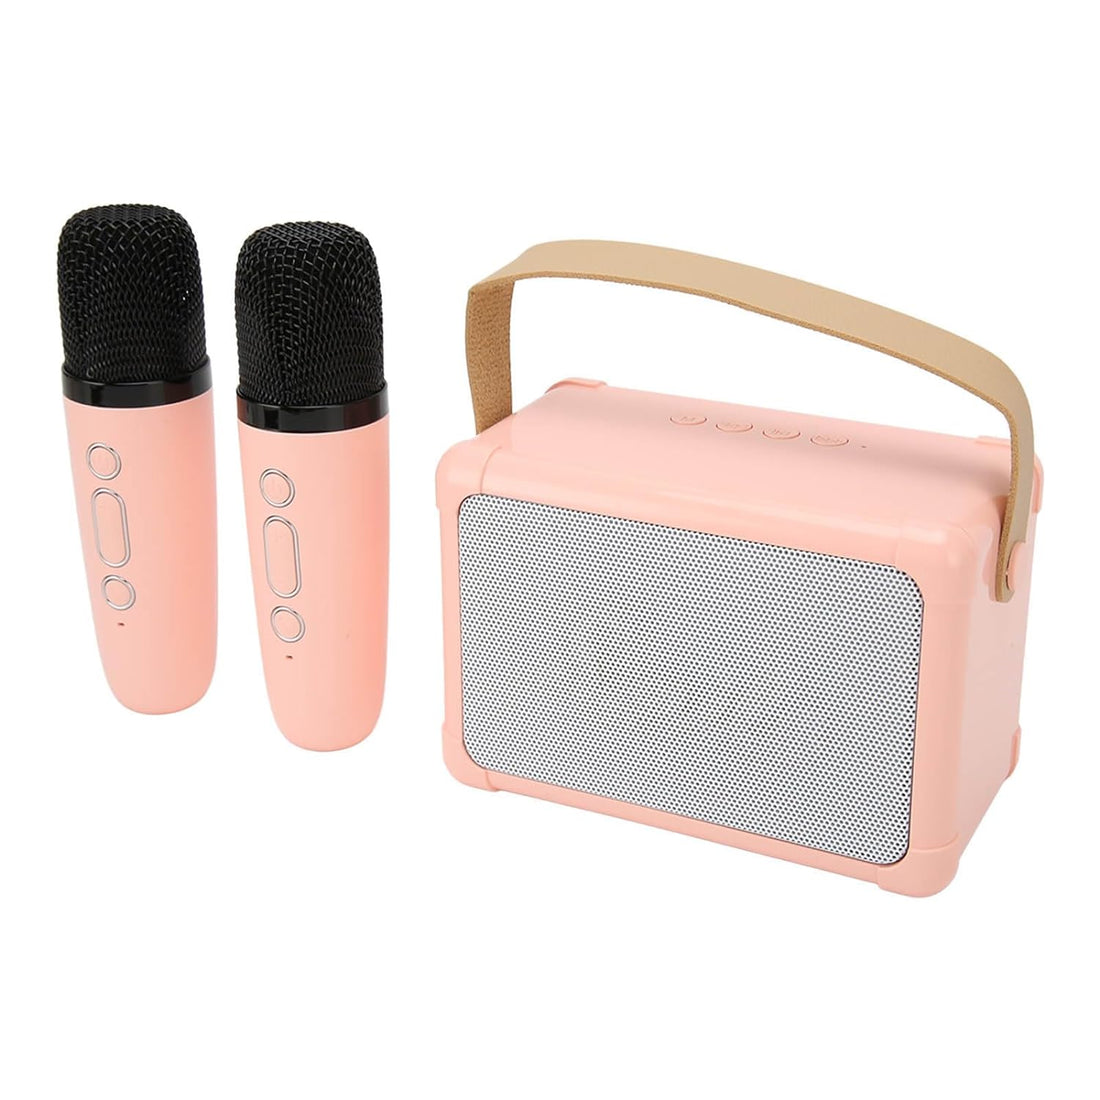 Wireless Microphone Set with Speaker Mini Portable Karaoke Machine with Dynamic Light Multi Sound Effects Stable HiFi Support Home Adult AUX (#2)